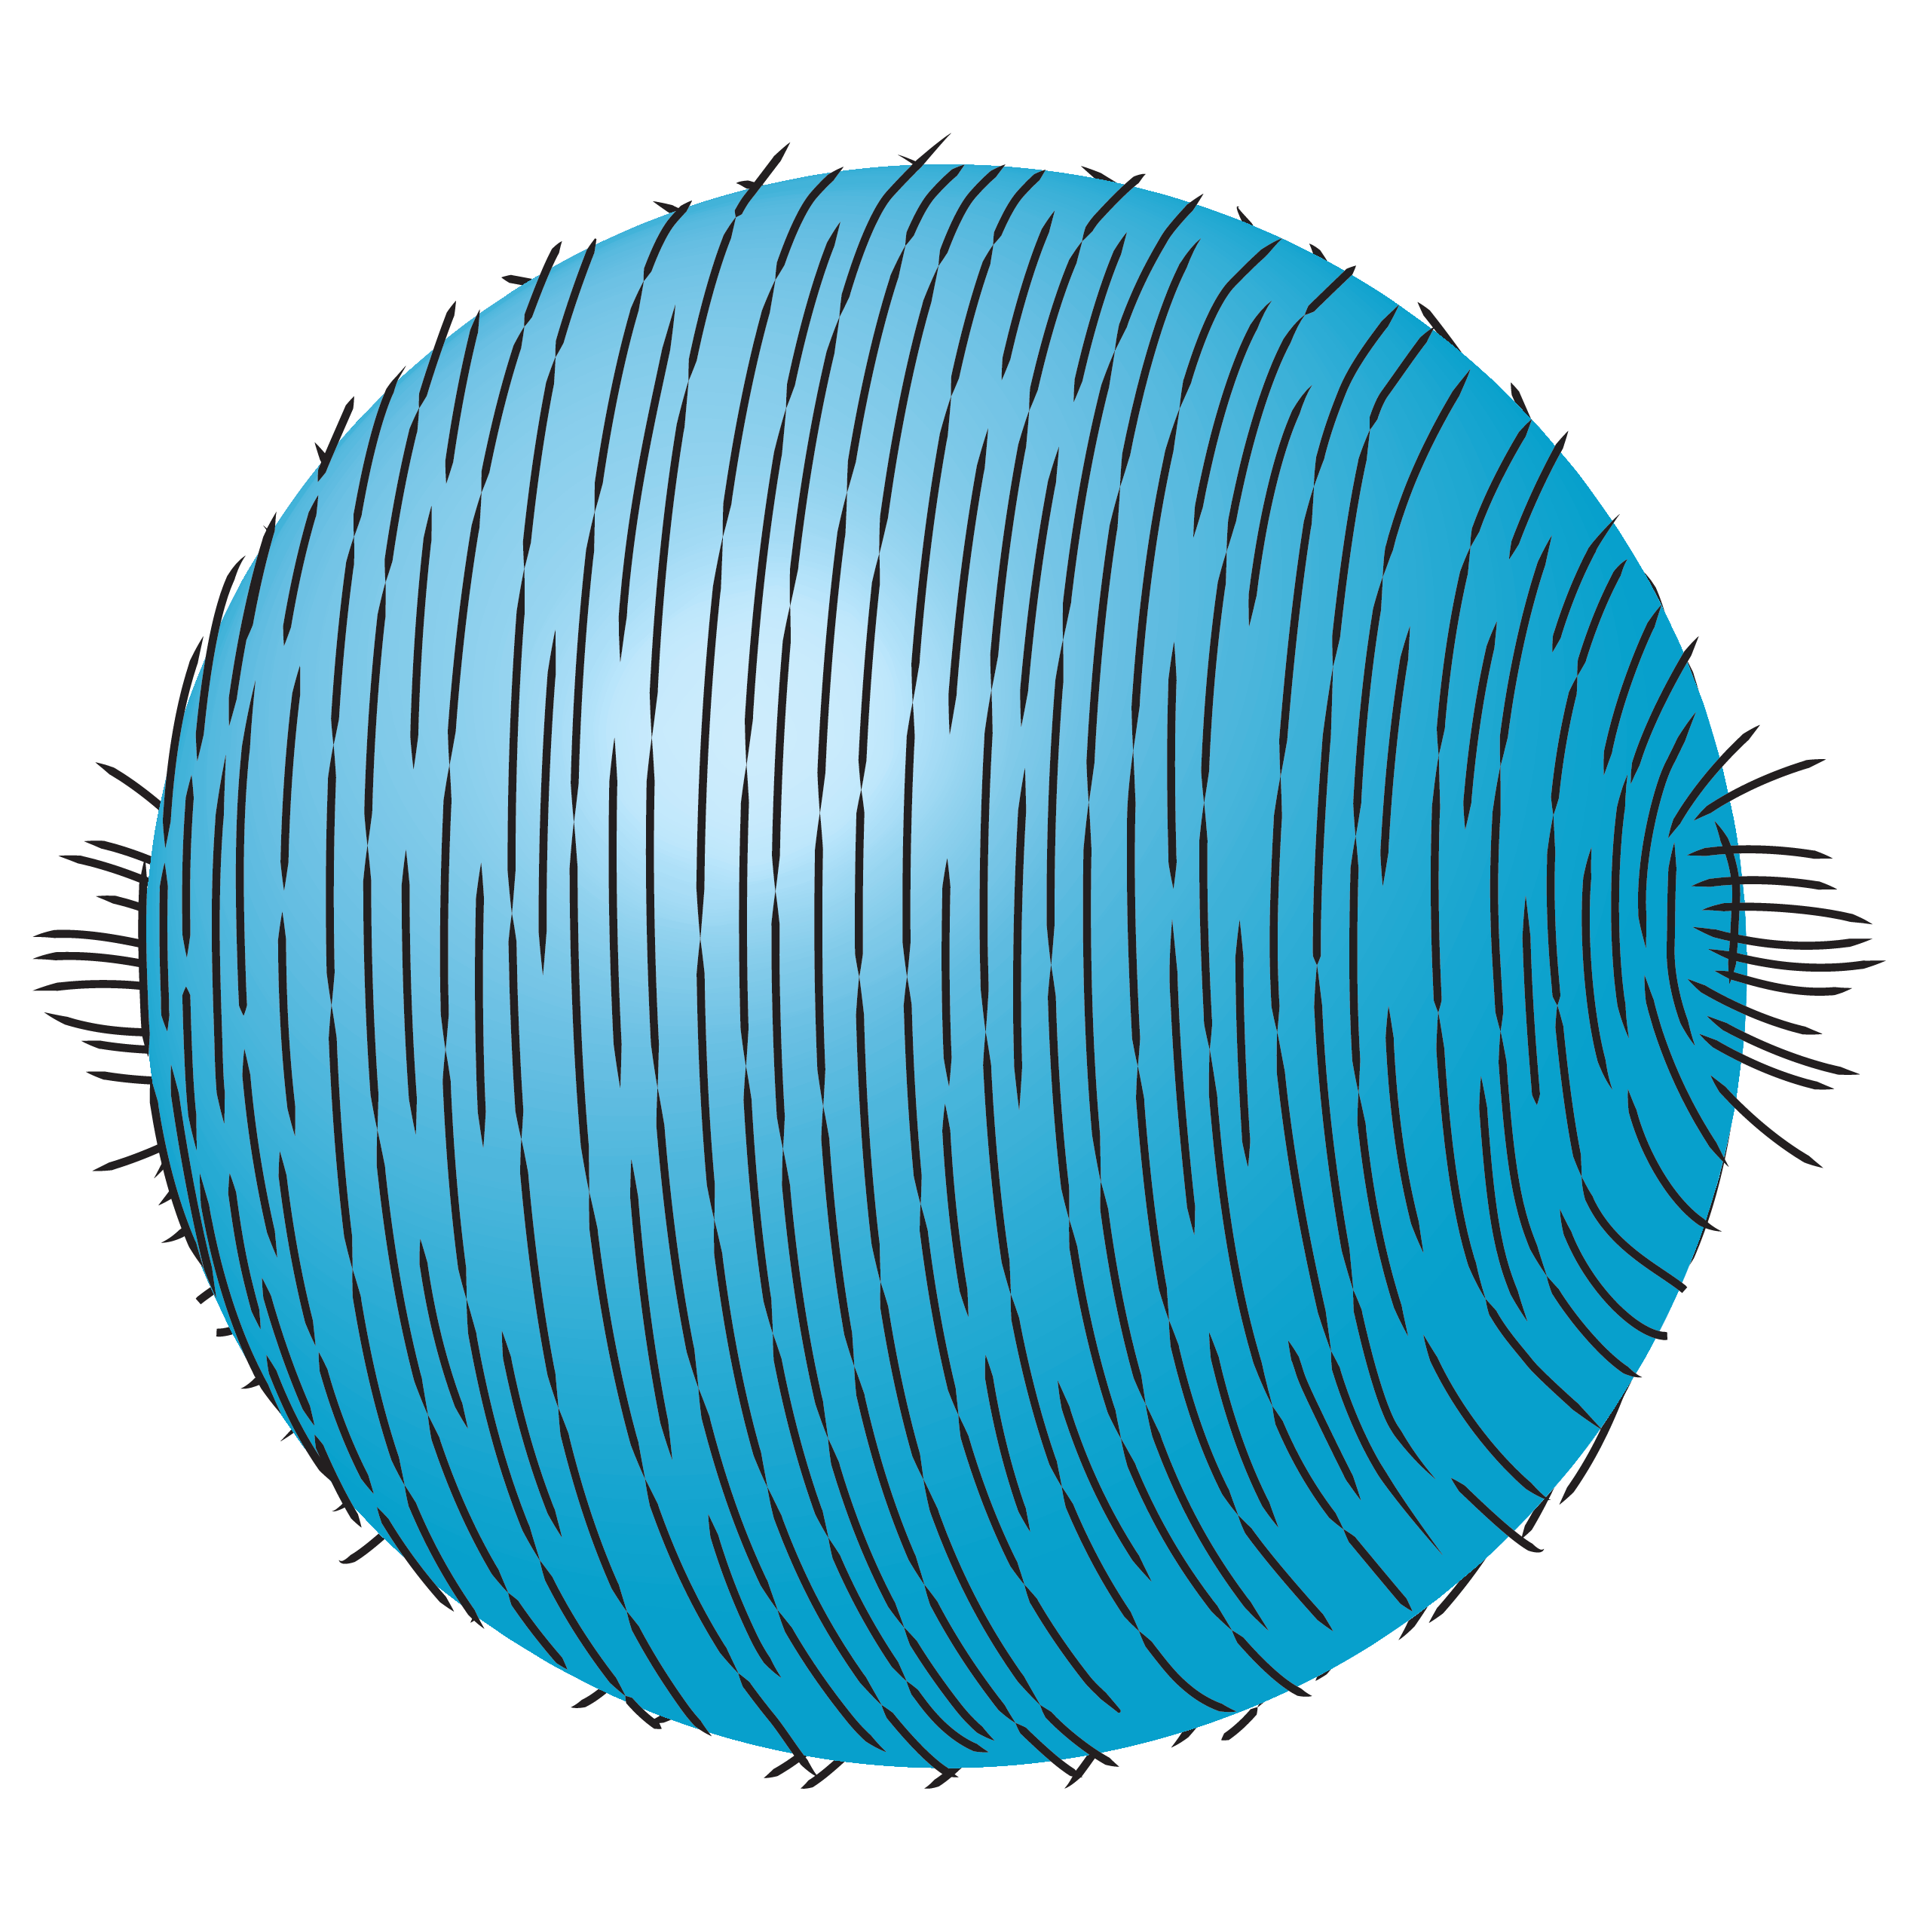 Graphic shows a sphere covered in small lines resembling hairs that are all combed in the same direction. Tufts on either side demonstrate the hairy ball theorem.